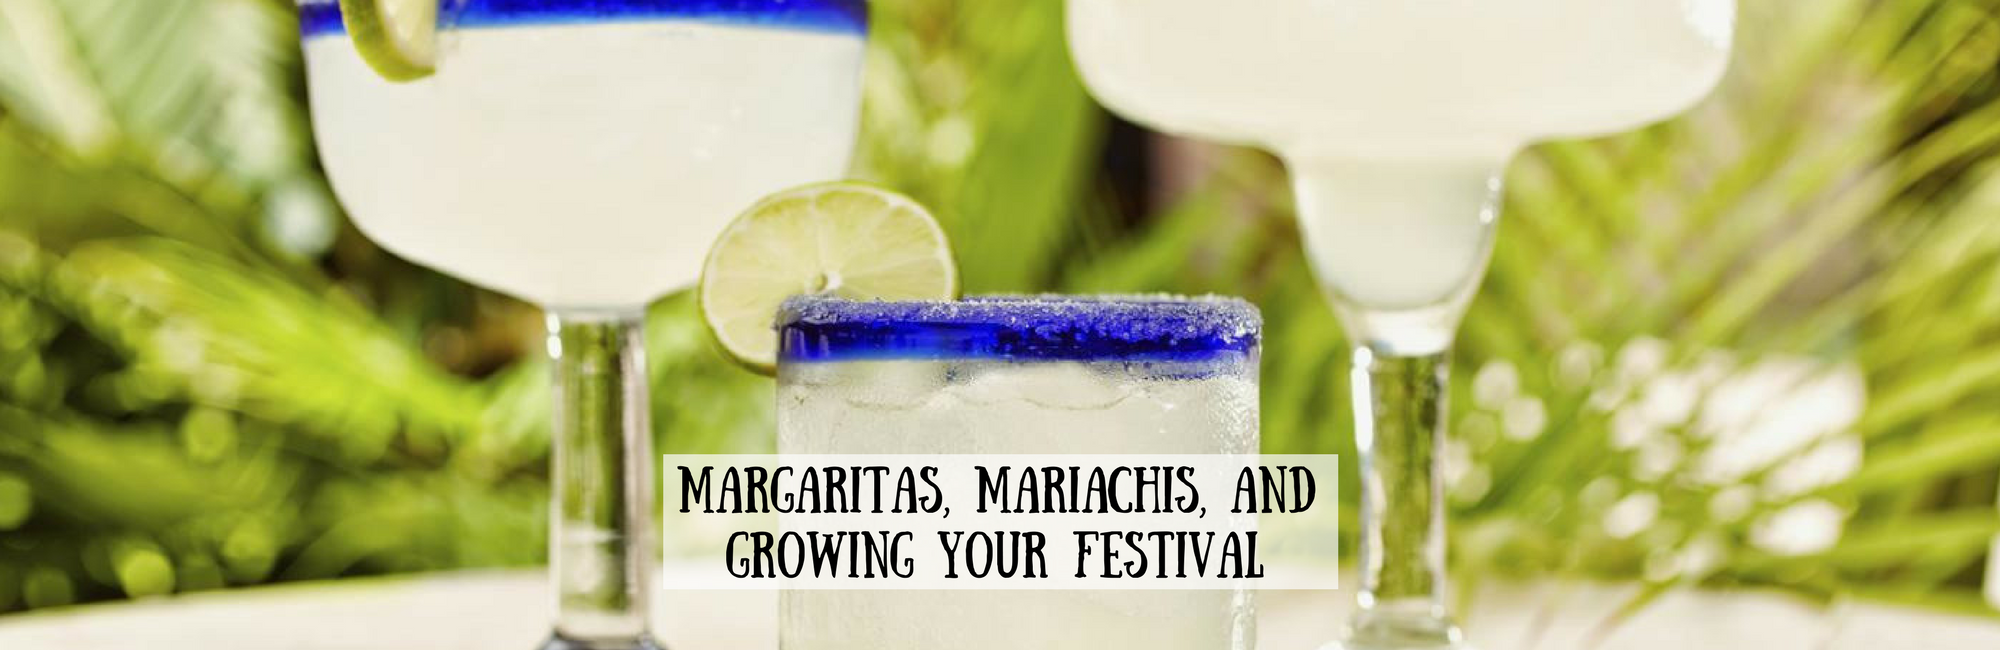 Margaritas, Mariachis, and Growing Festivals